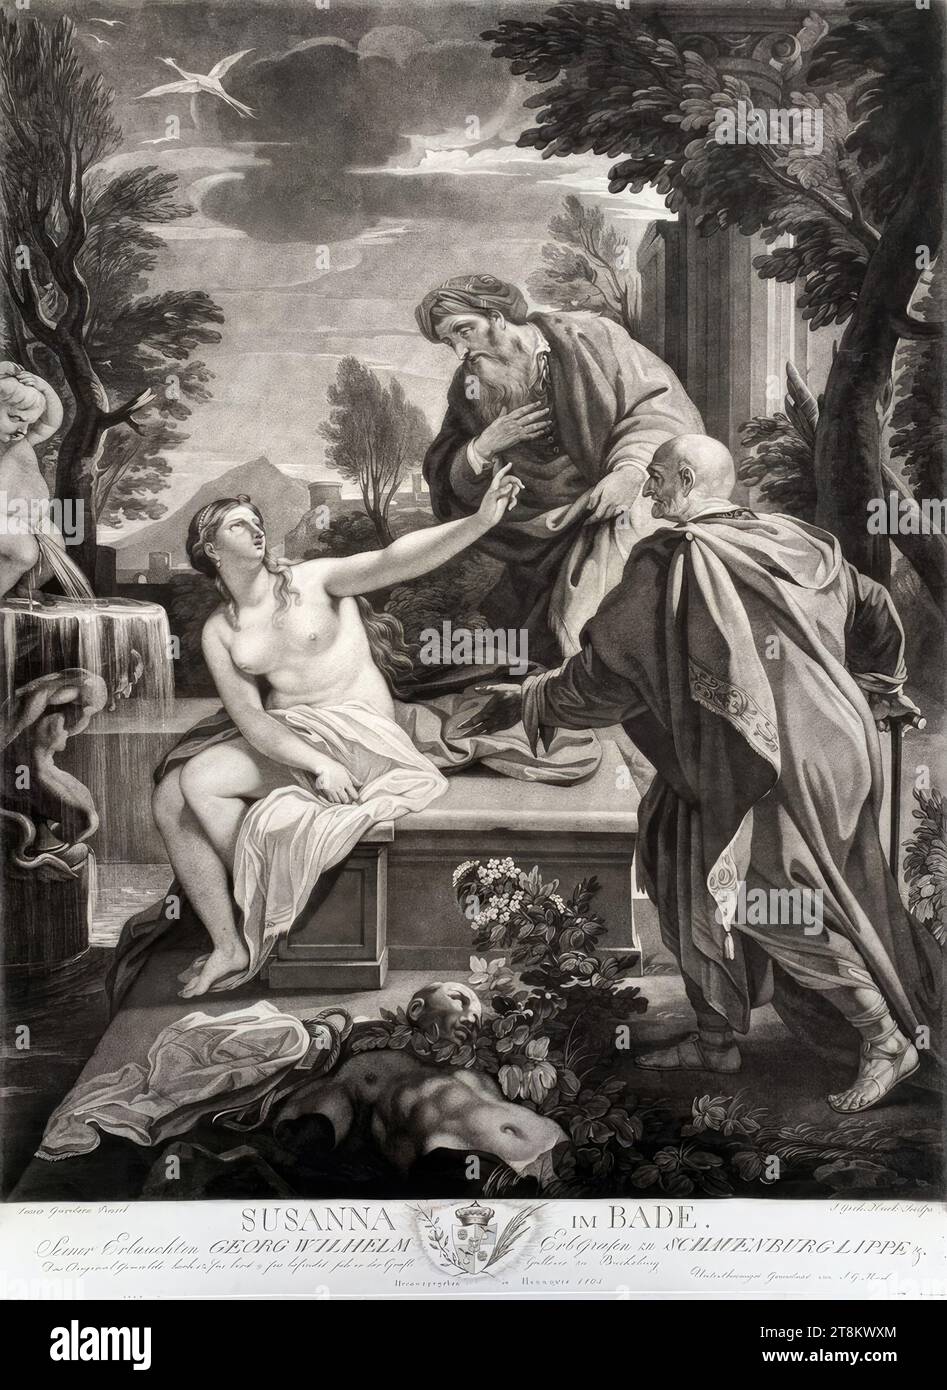 Susanna in the bath, 1804, print, mezzotint, sheet: 72.5 × 52.4 cm, l. u. 'Lucca Giordano Pinxit'; M.u. 'SUSANNA IN THE BATH . / His illustrious GEORG WILHELM Hereditary Count of SCHAUENBURGLIPPE / The original painting high 12 feet wide 9 feet is located in the Graefl. Gallery at Bückeburg / Untergaenigst Dedicated by J. G. Huck. / Published in Hanover 1804.', interrupted by the coat of arms Stock Photo